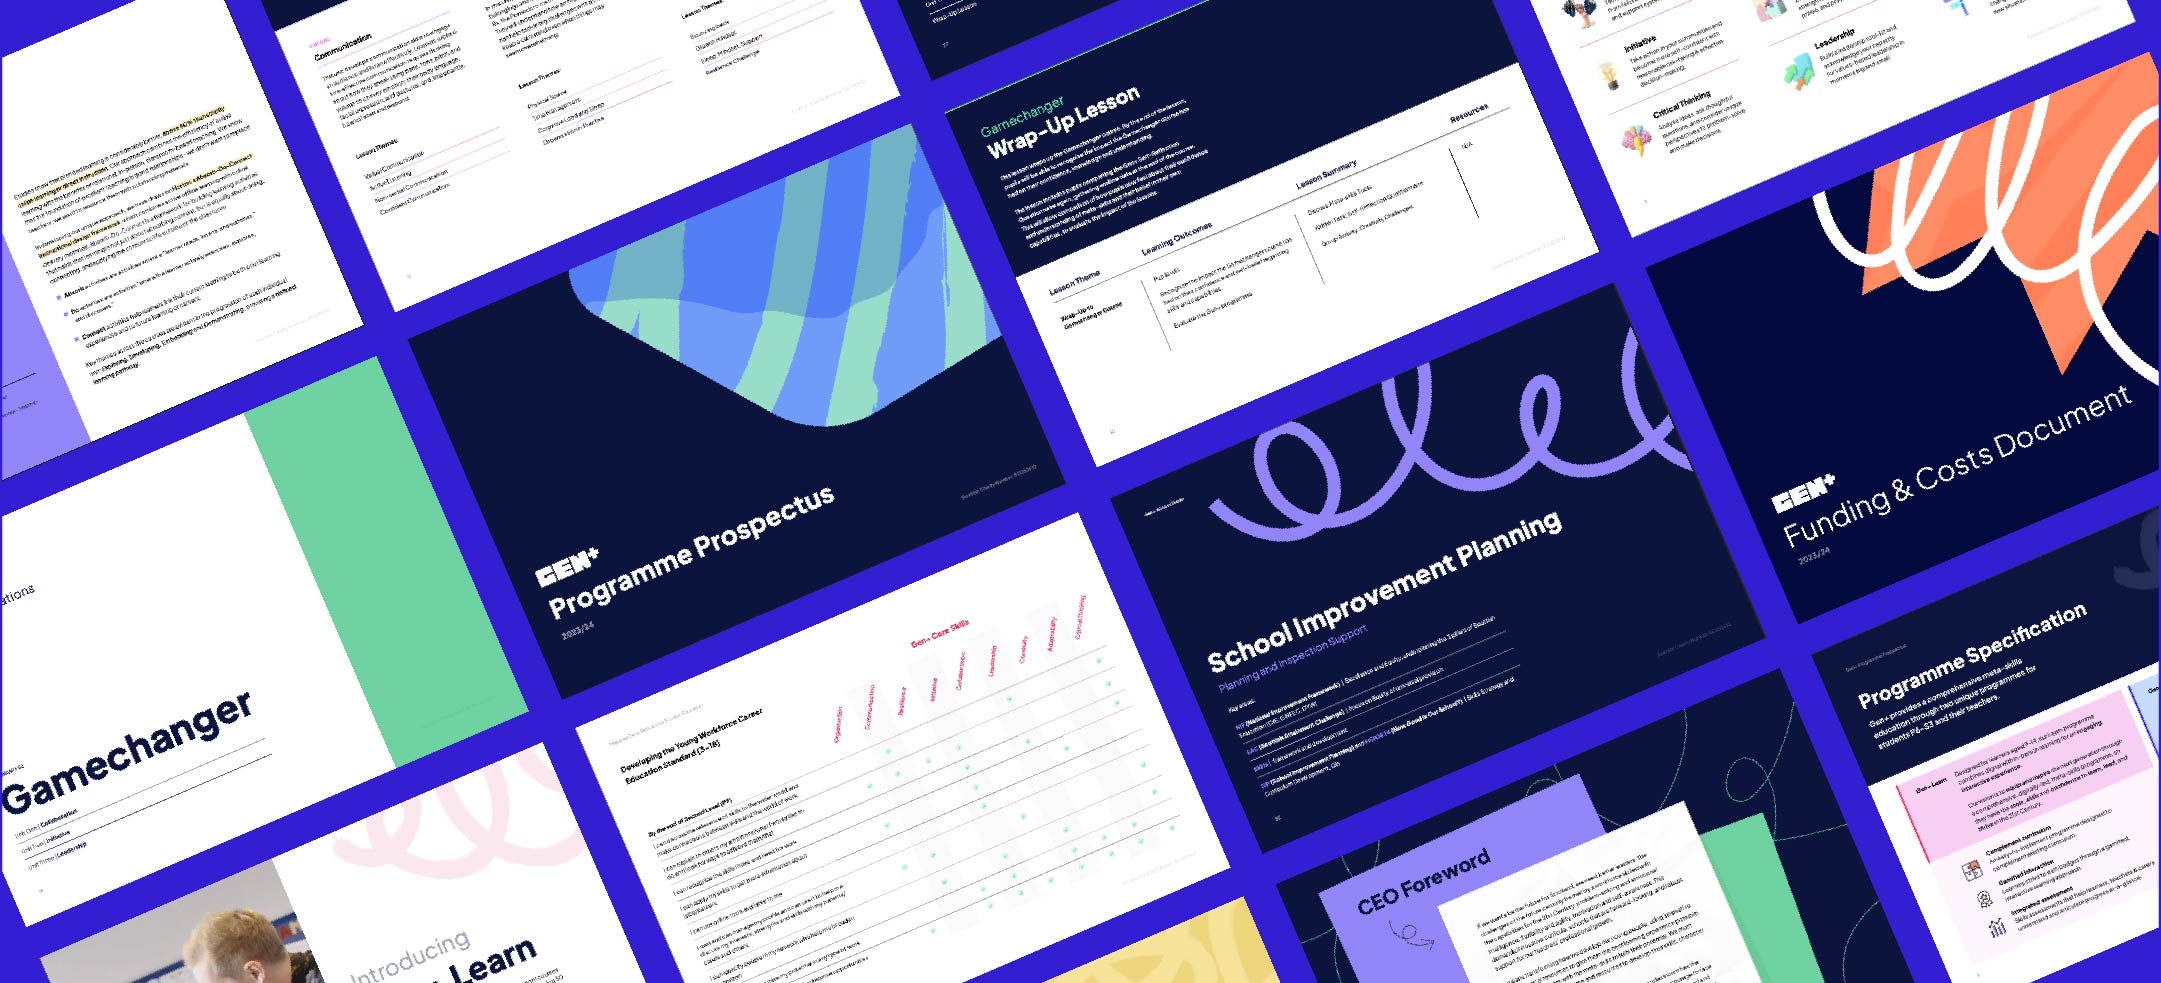 A grid of colourful document pages showing the breadth and depth of styles.